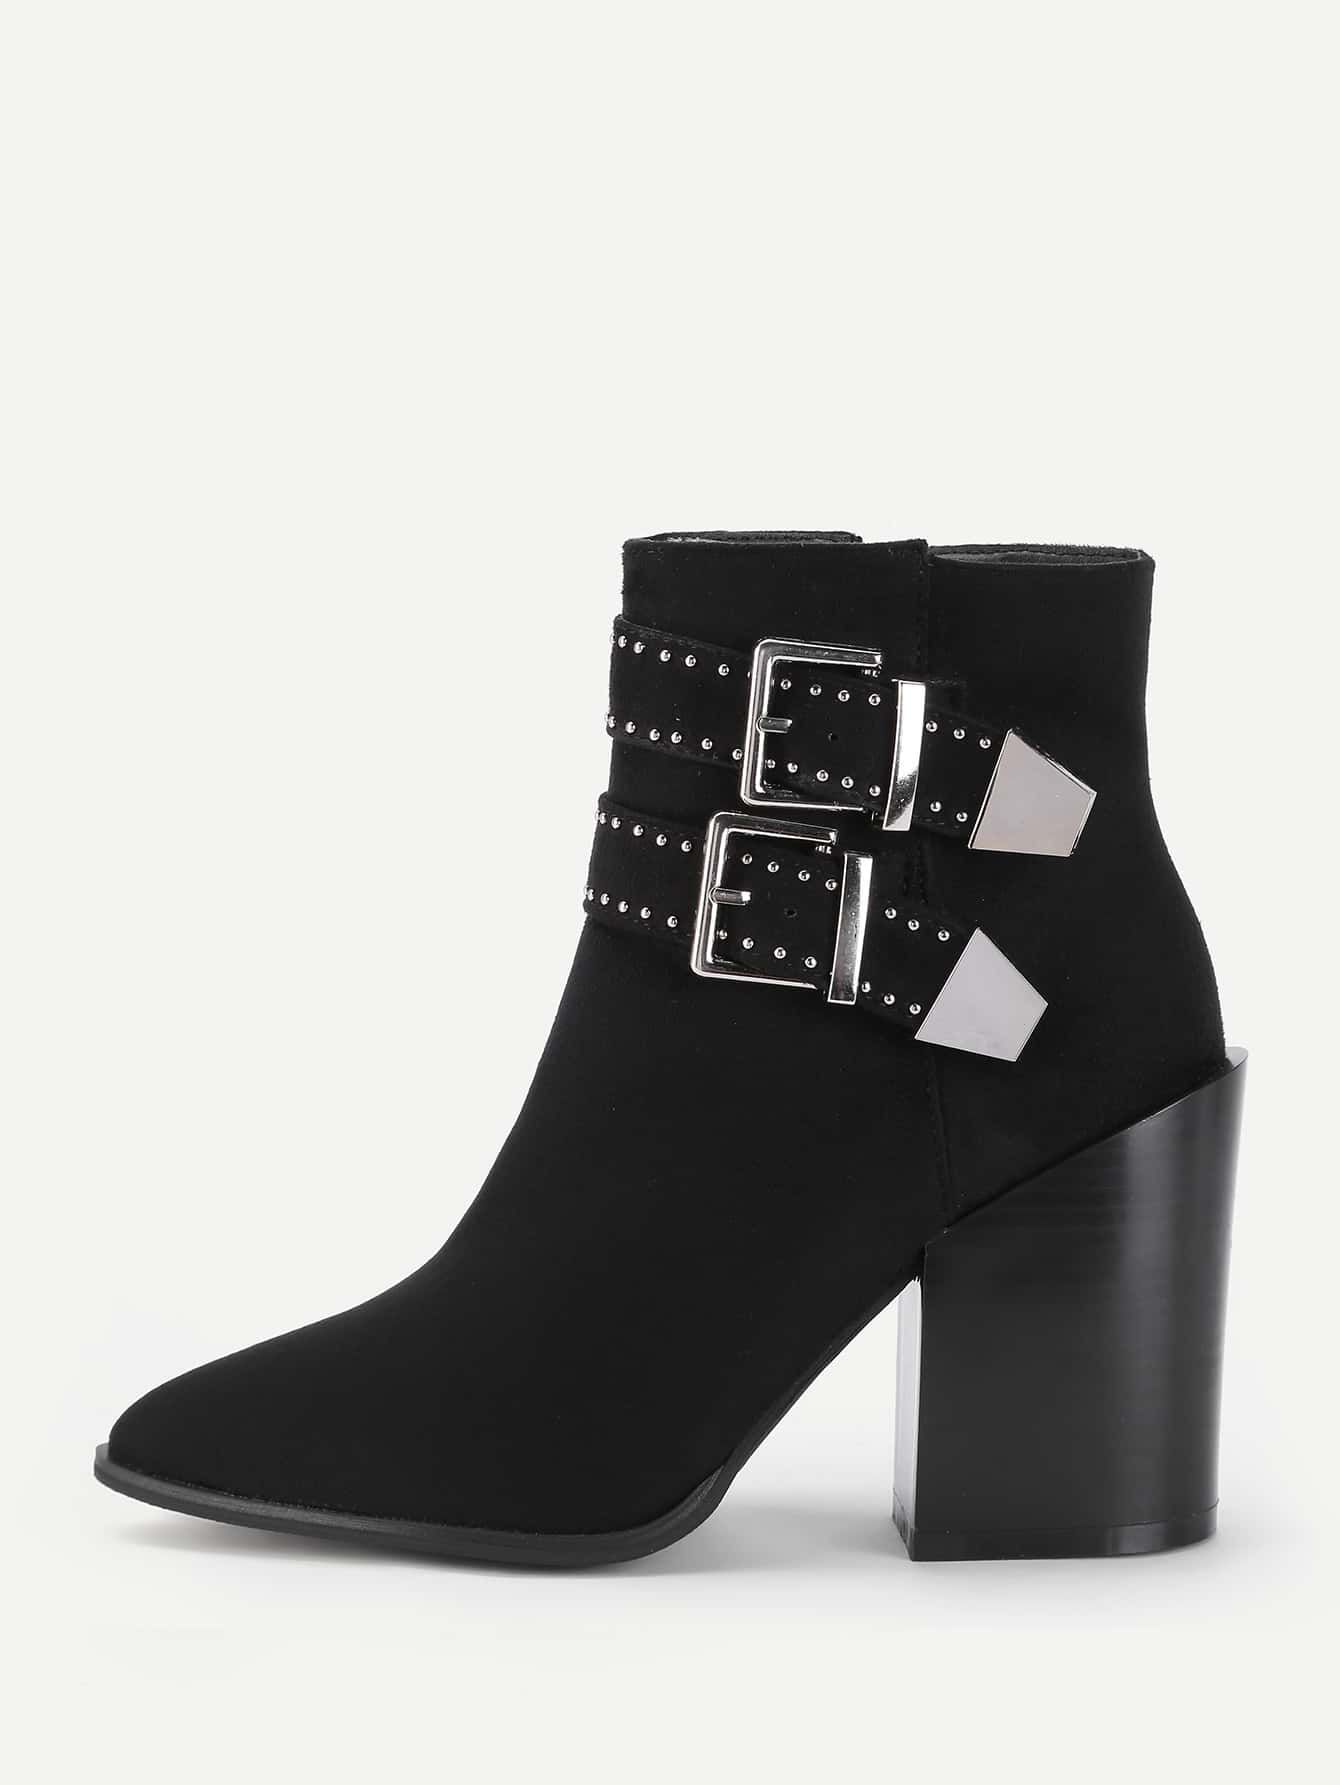 Double Buckle Block Heeled Ankle Boots | SHEIN